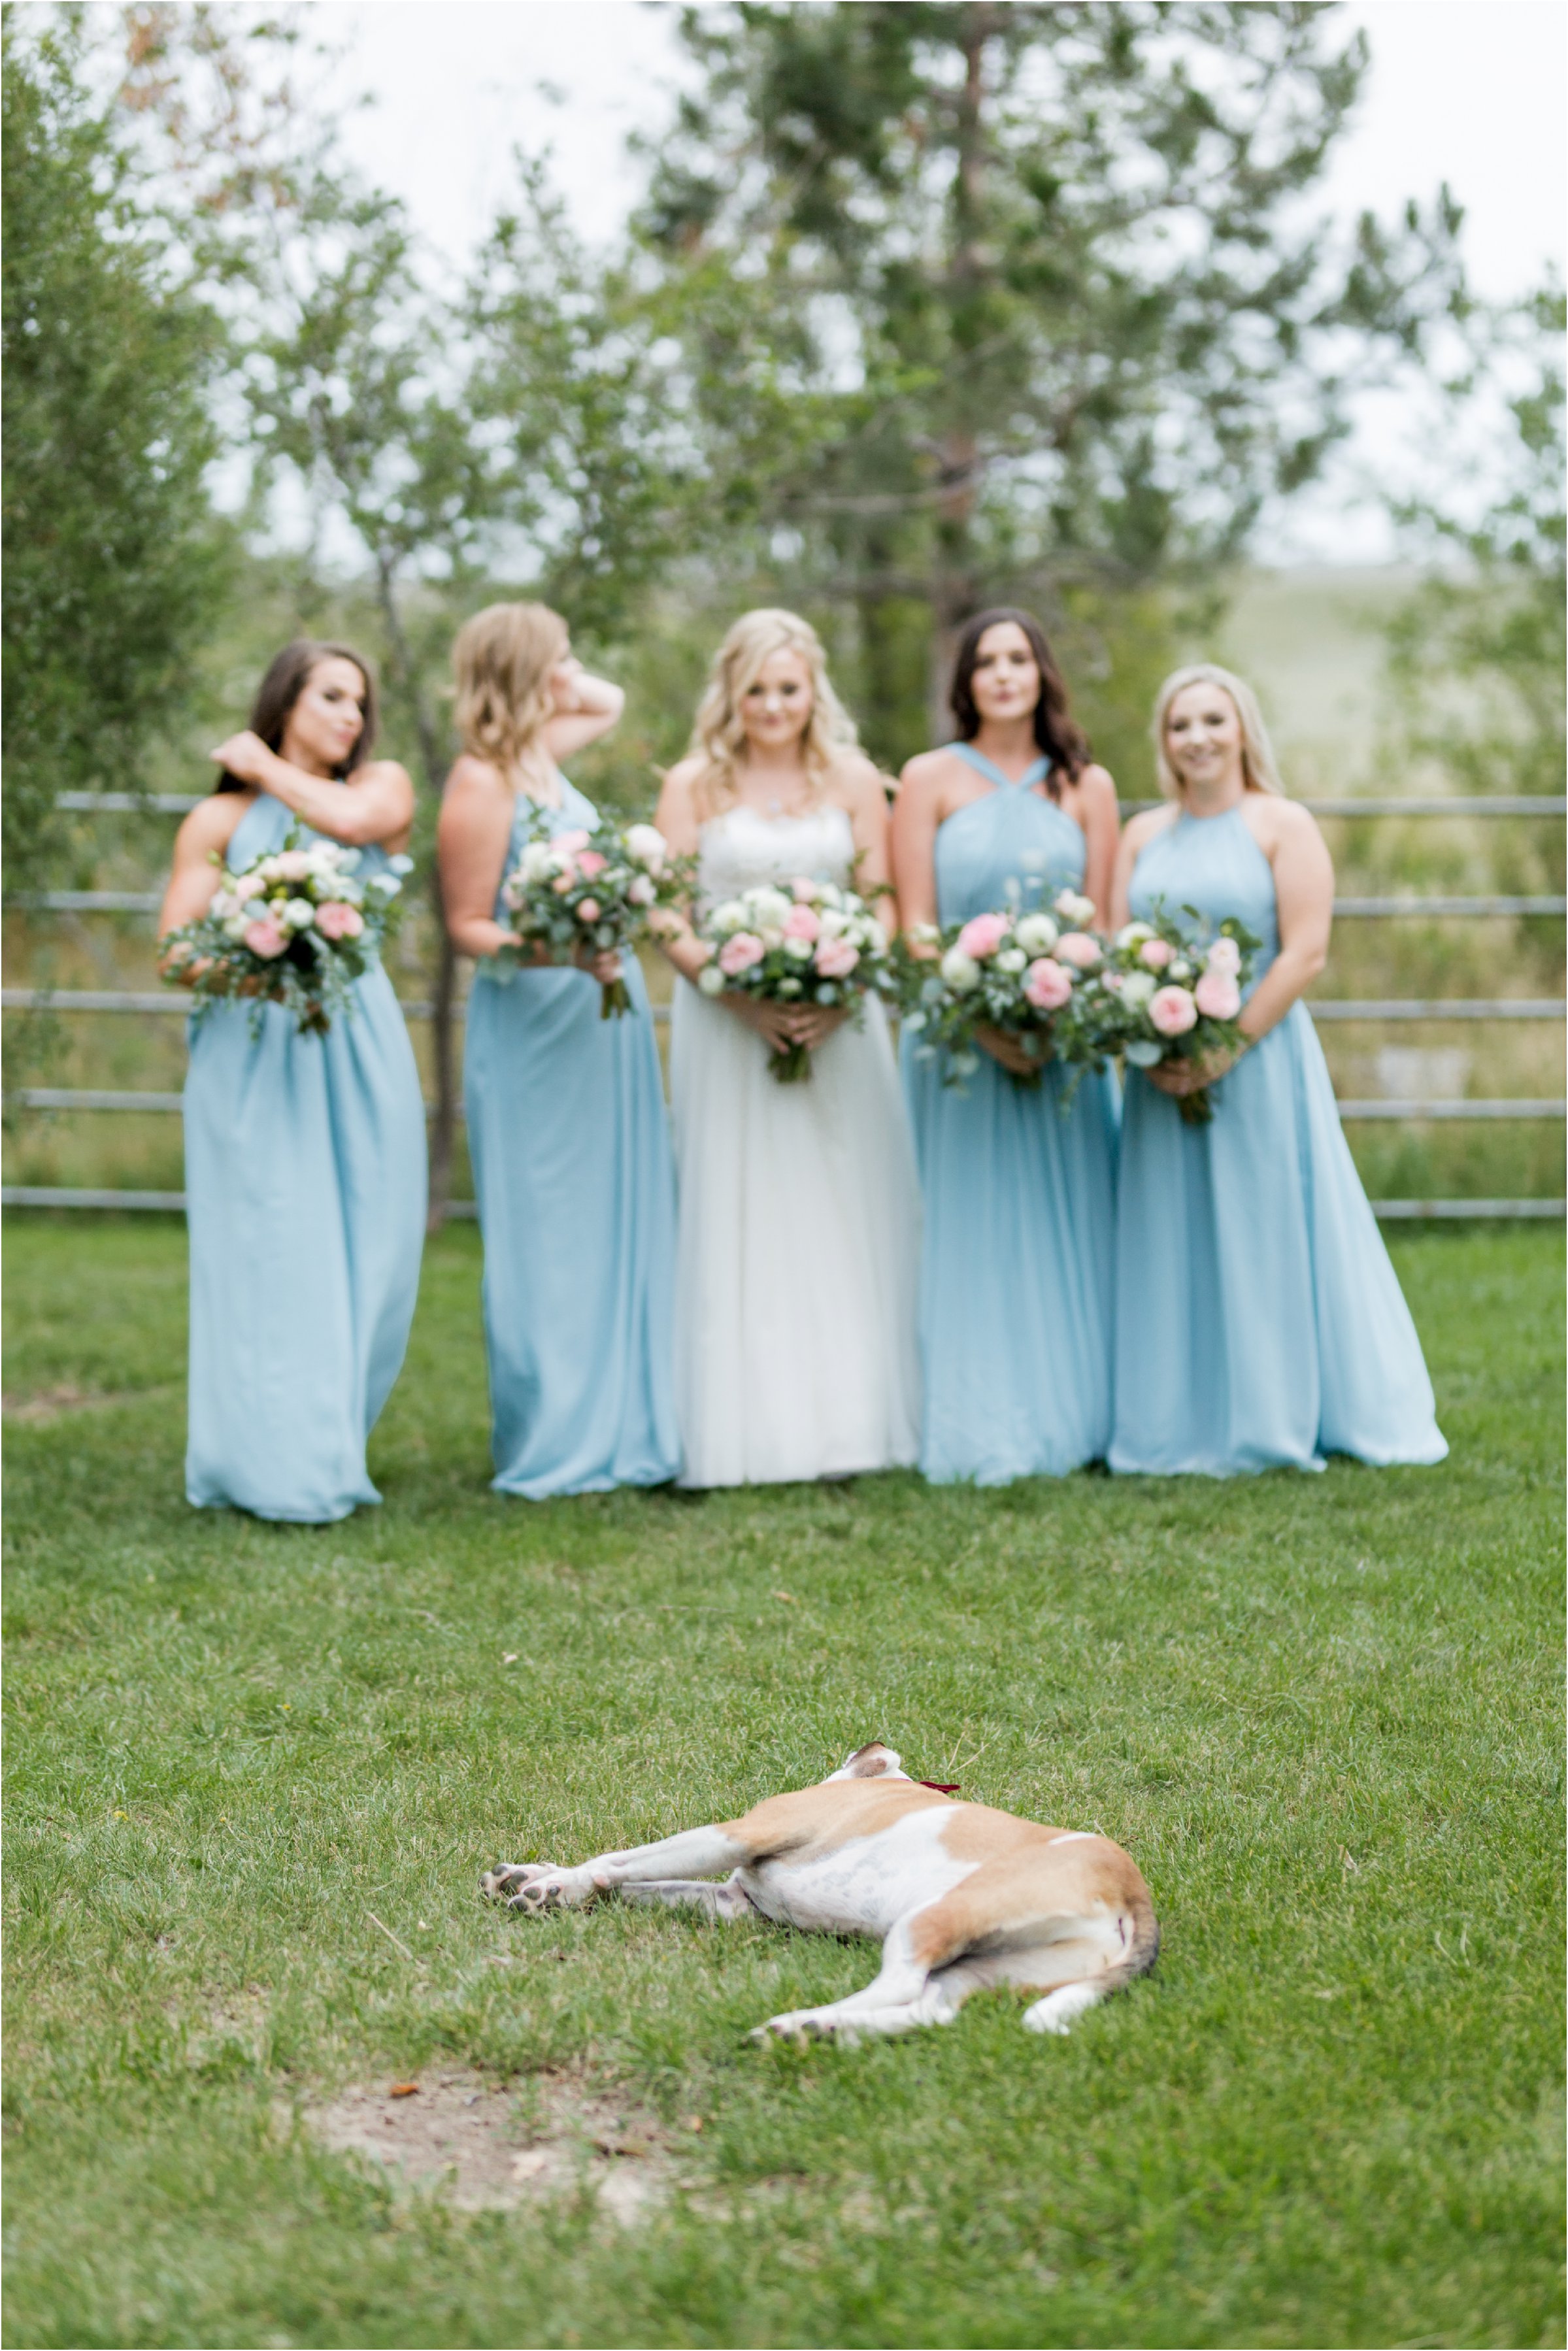 the bride and groom's dog lying on the ground in front of the bride and her bridesmaids